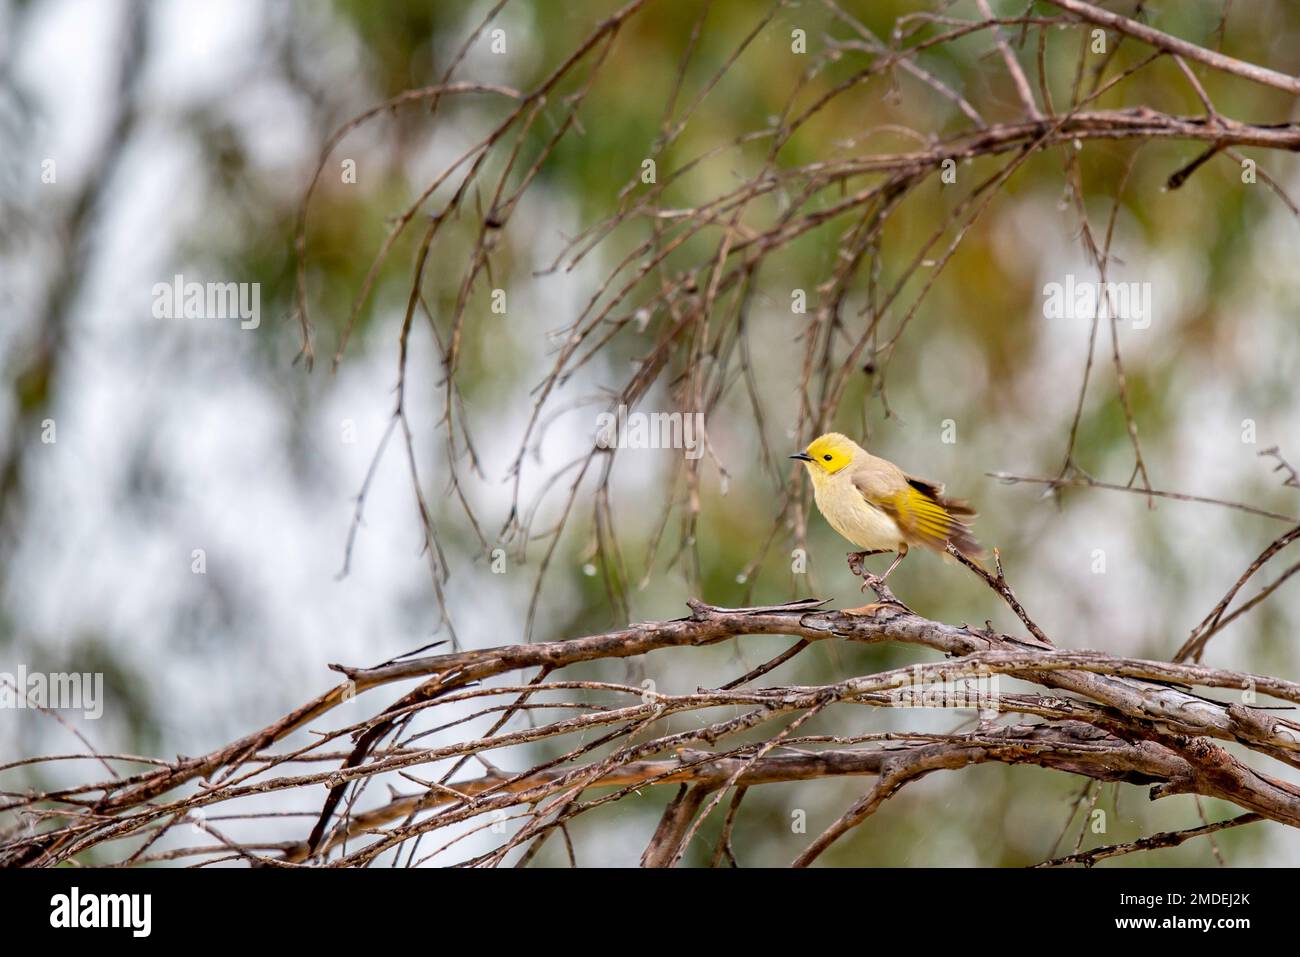 A White-plumed Honeyeater (Ptilotula penicillata) perched on a branch in the early morning at the Narromine Wetlands in western New South Wales, Aust Stock Photo